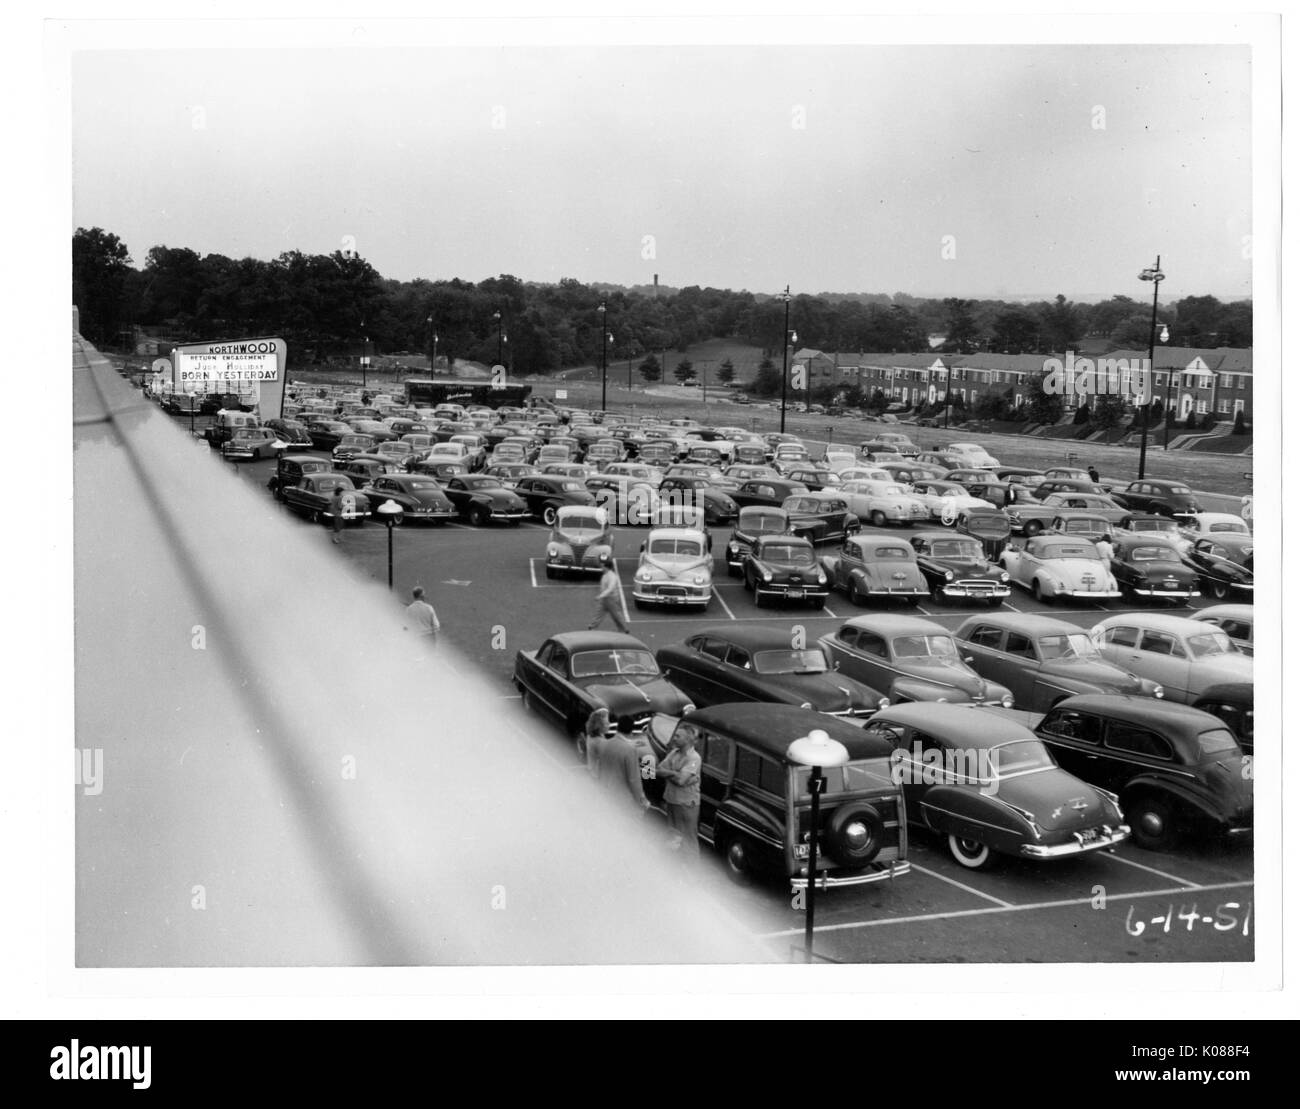 View of a packed parking lot from the roof of the Northwood Shopping Center, across the street from the center and parking lot are brick row homes, Baltimore, Maryland, 1951. Stock Photo